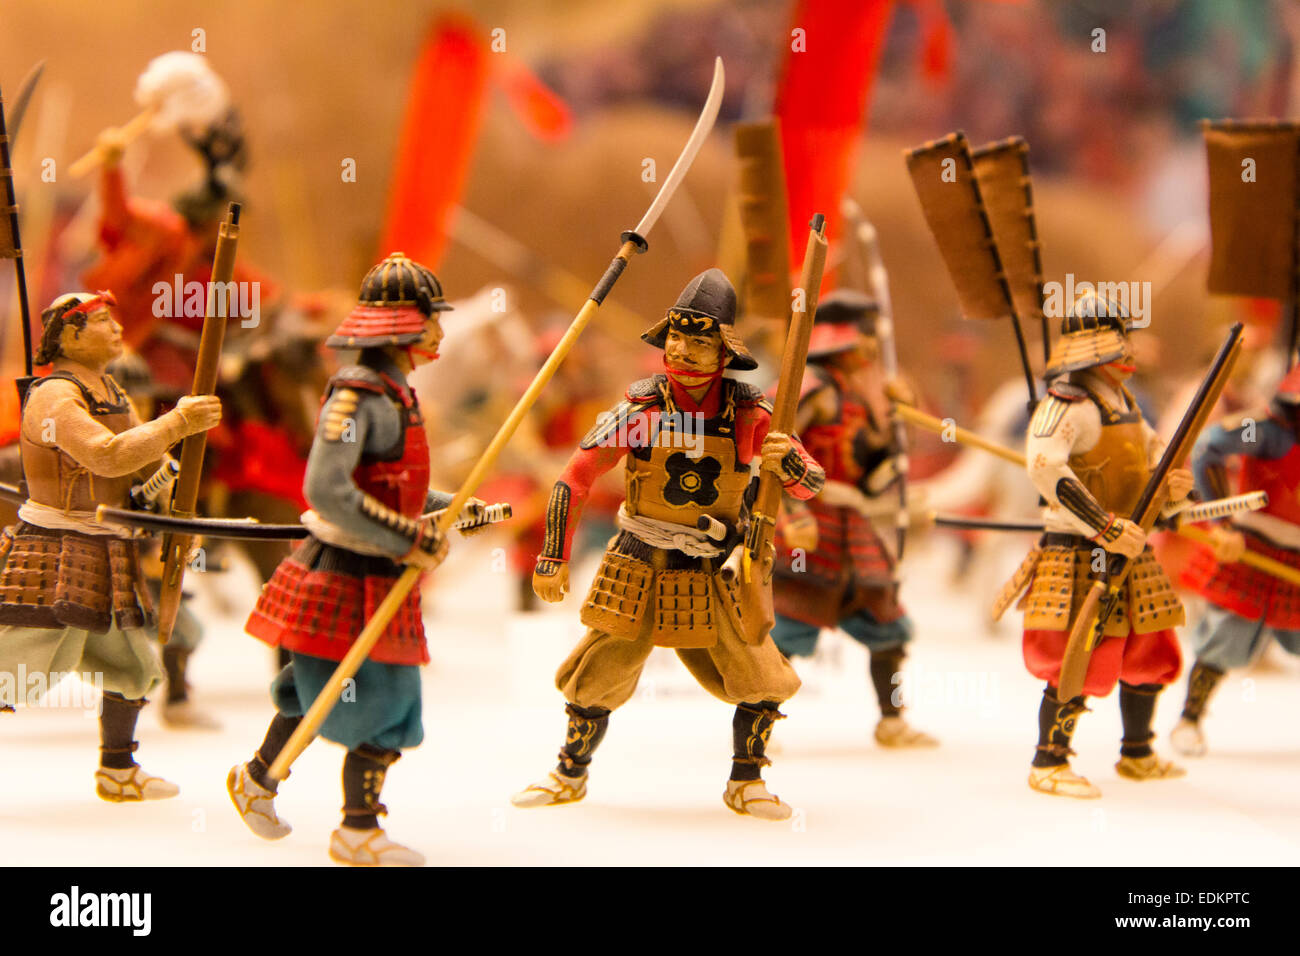 Exhibit model of a Japanese medieval battle with samurai soldiers. Close up of some of the model figurers, many carrying banners on their backs. Stock Photo